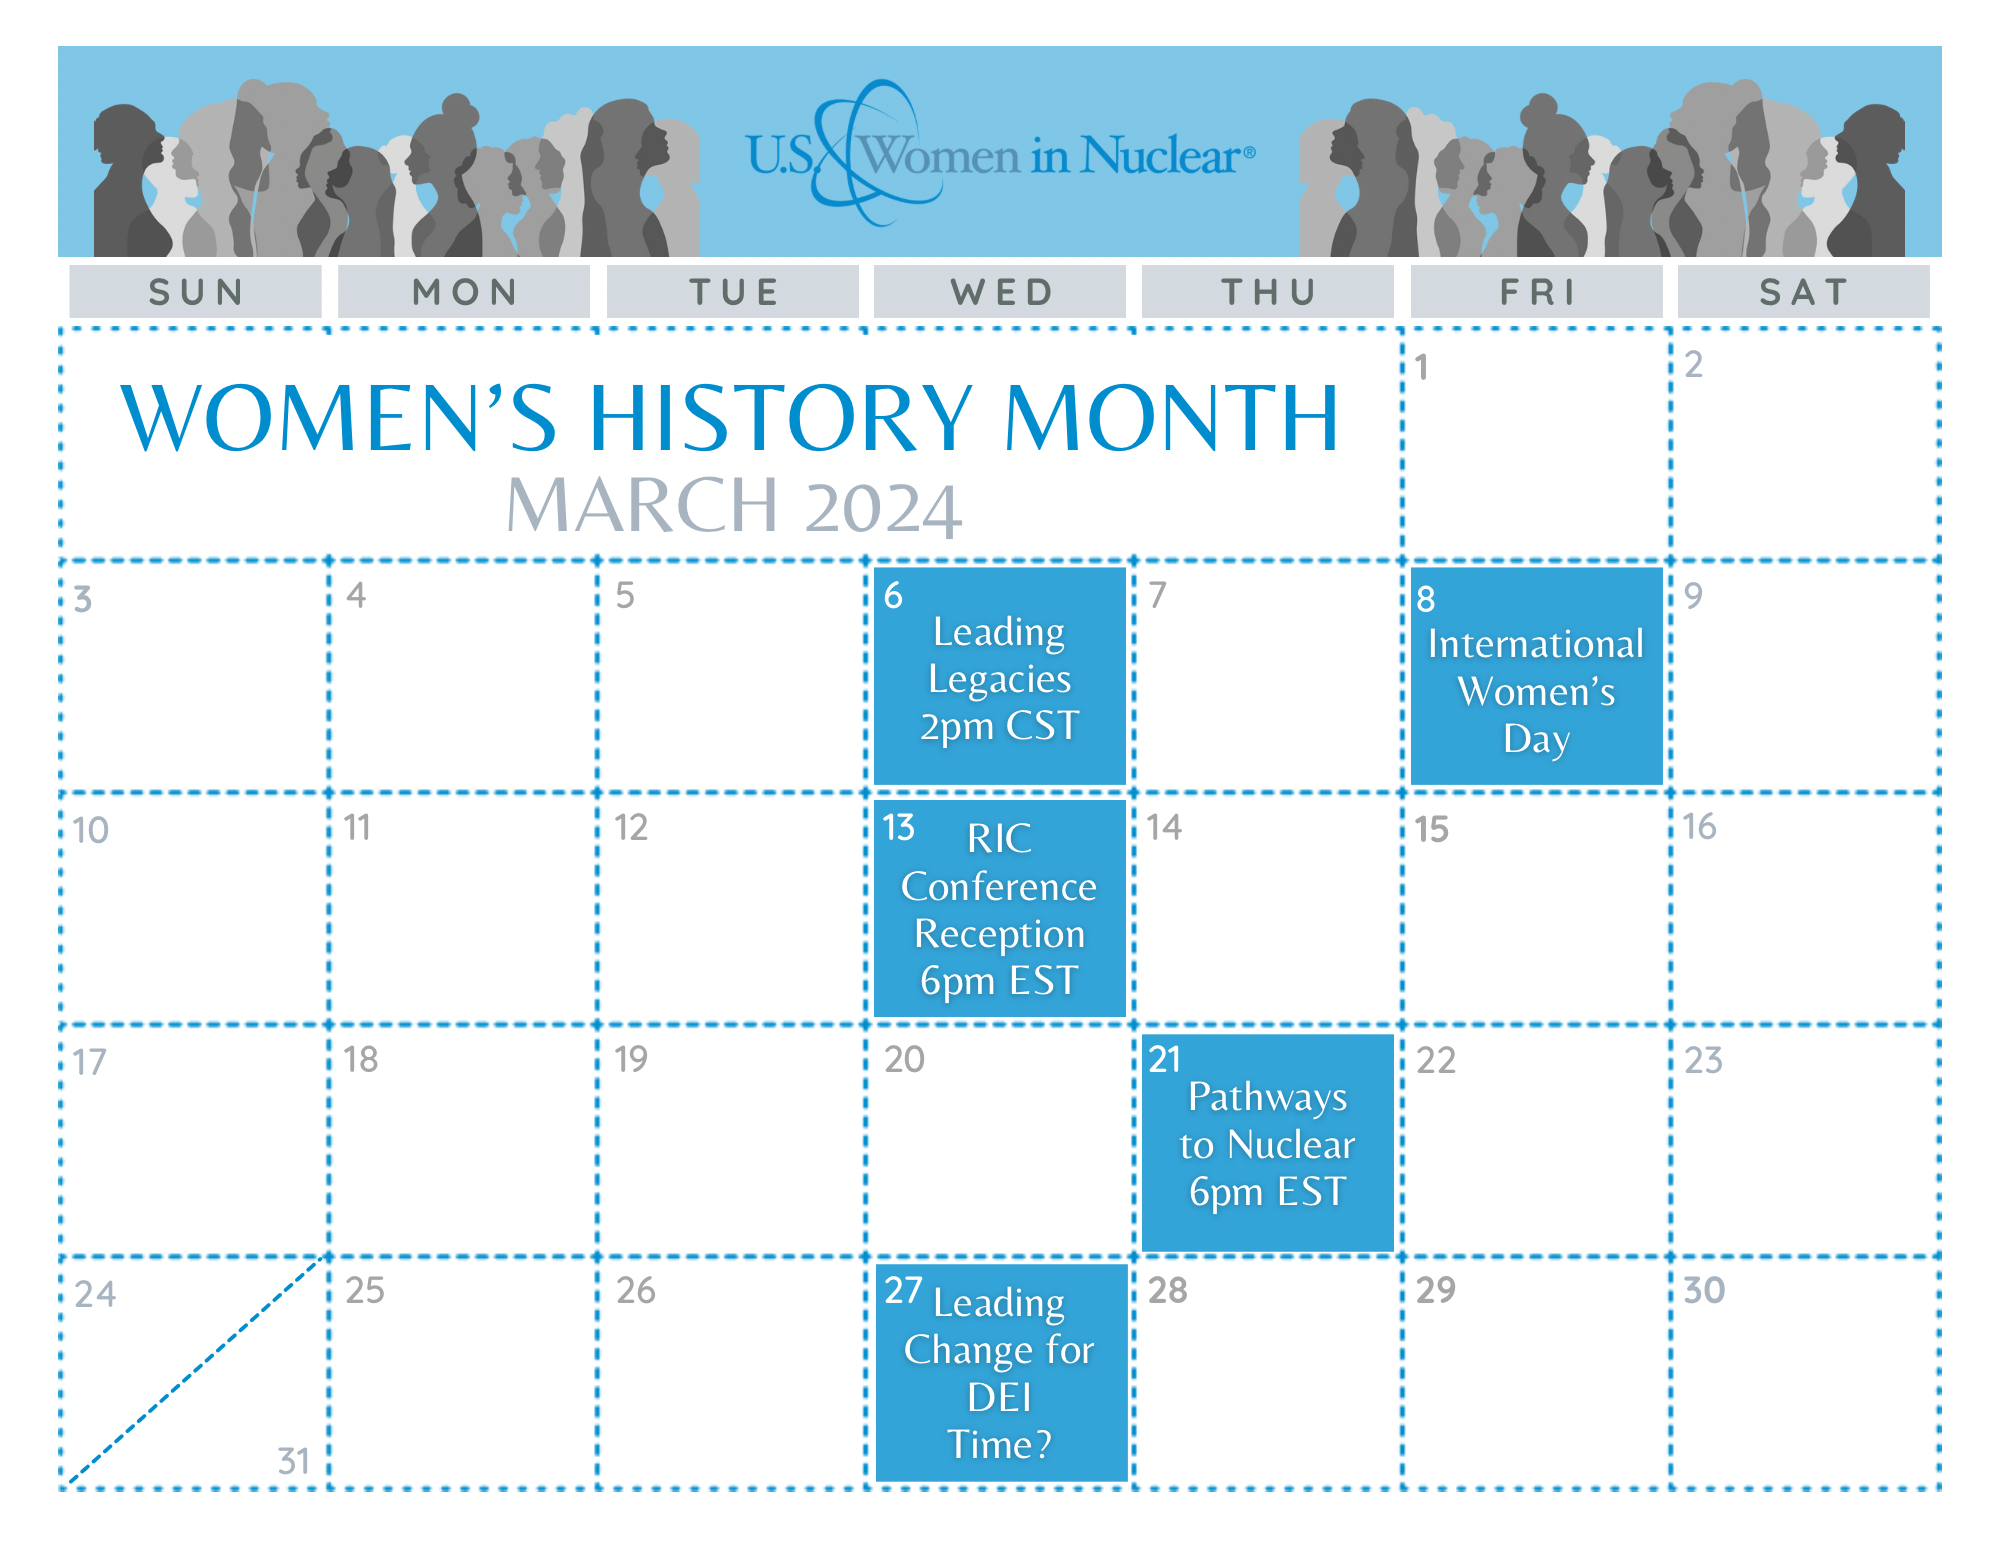 Calendar showing events during Women's History Month 2024